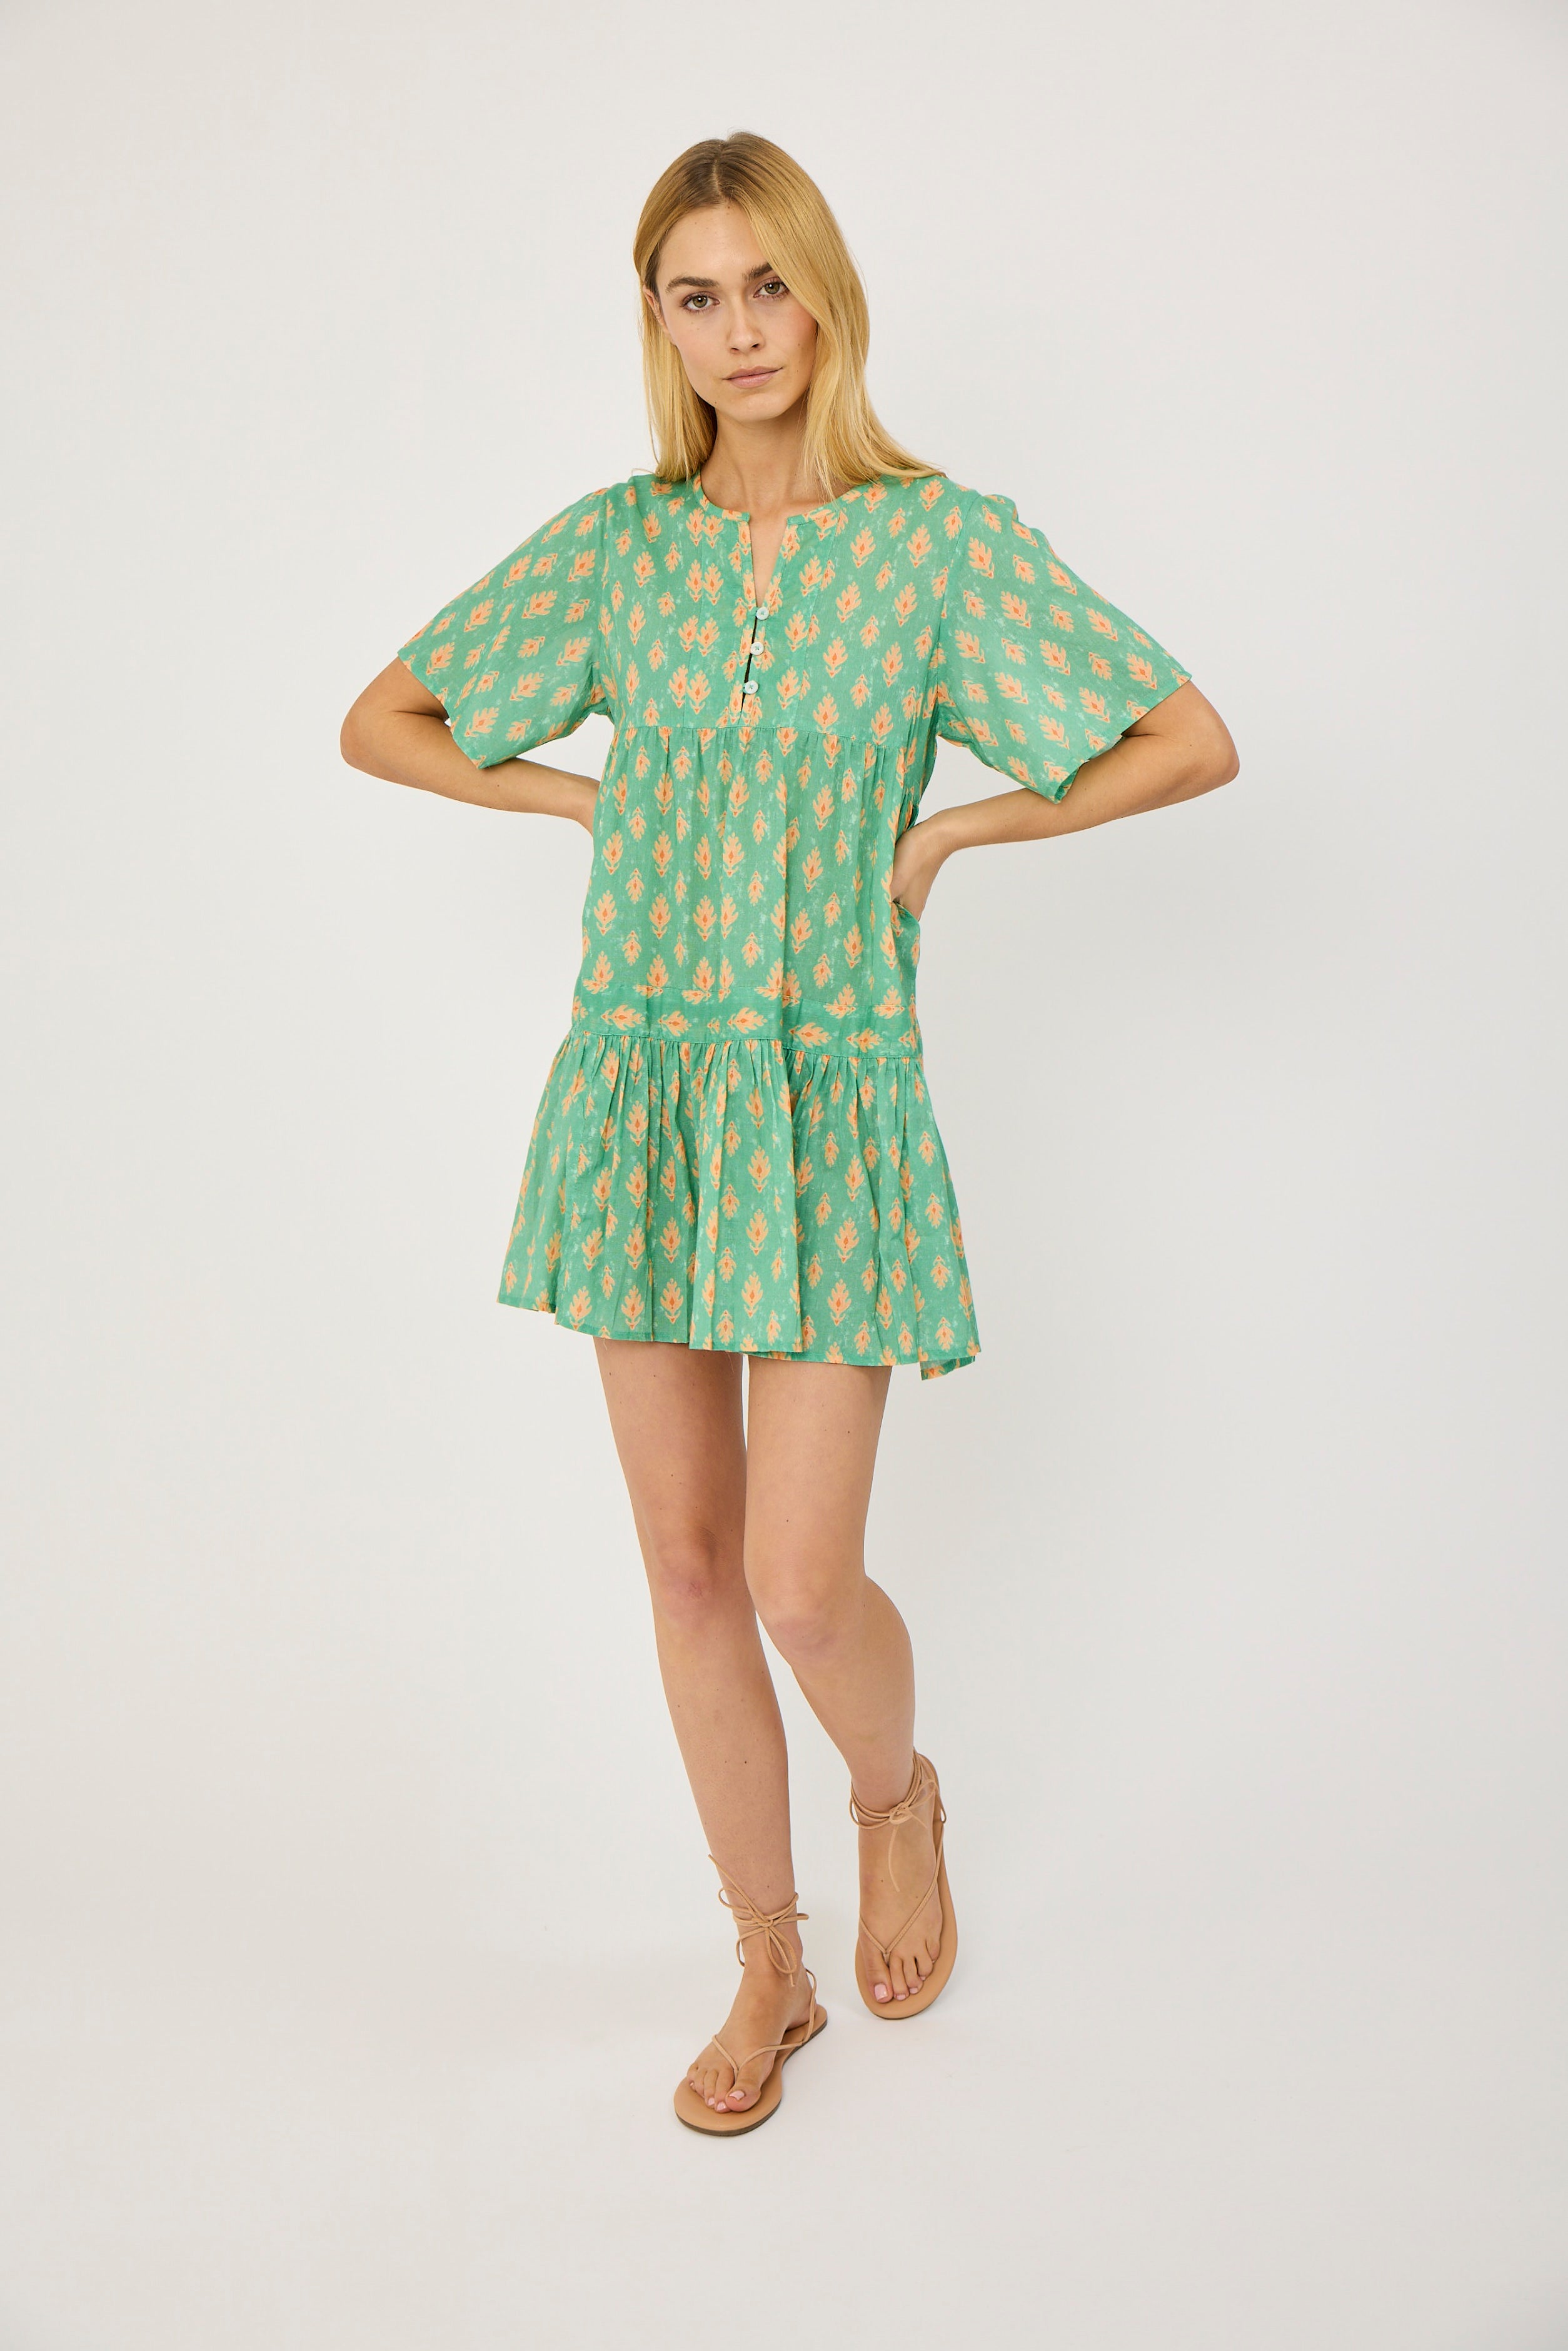 The Tiki Cover Up - Teal Coral